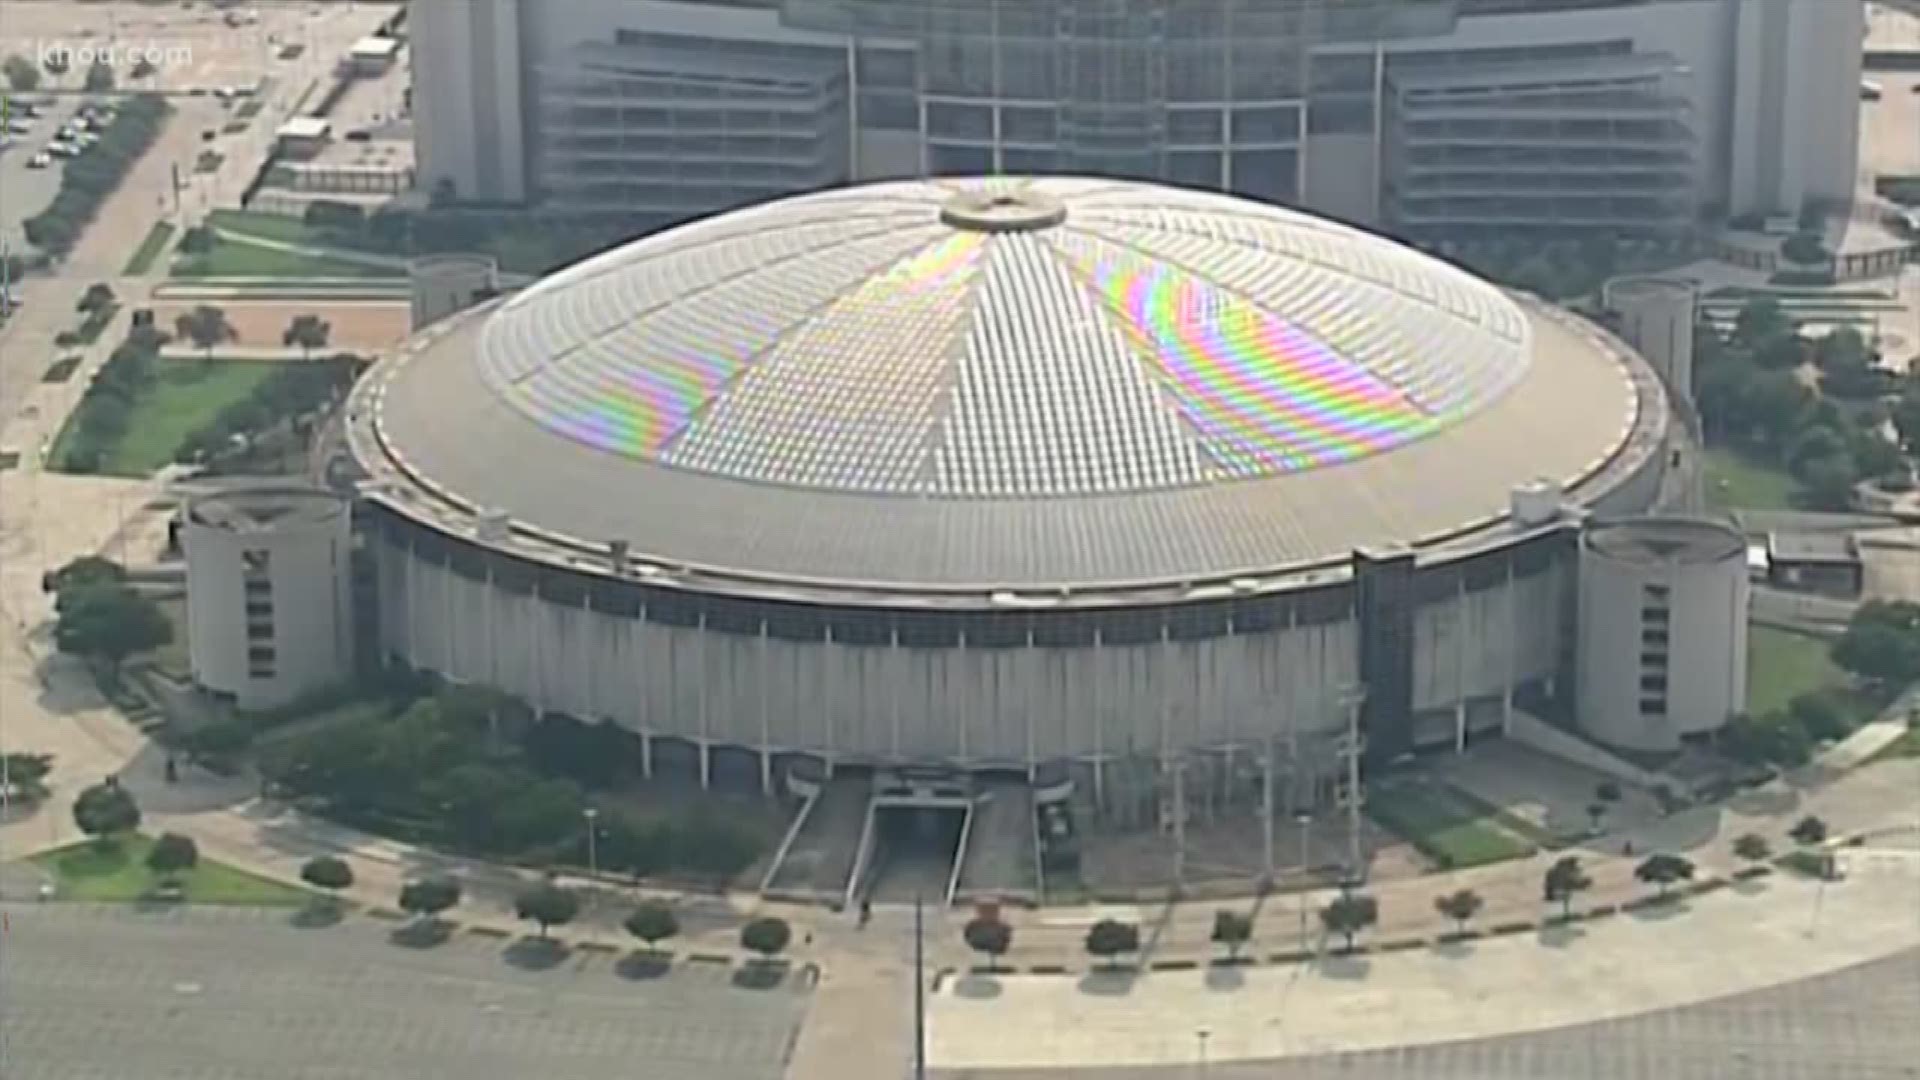 New Harris County Judge Lina Hidalgo says the price-tag for the redevelopment of the Astrodome may cost more money than first thought.